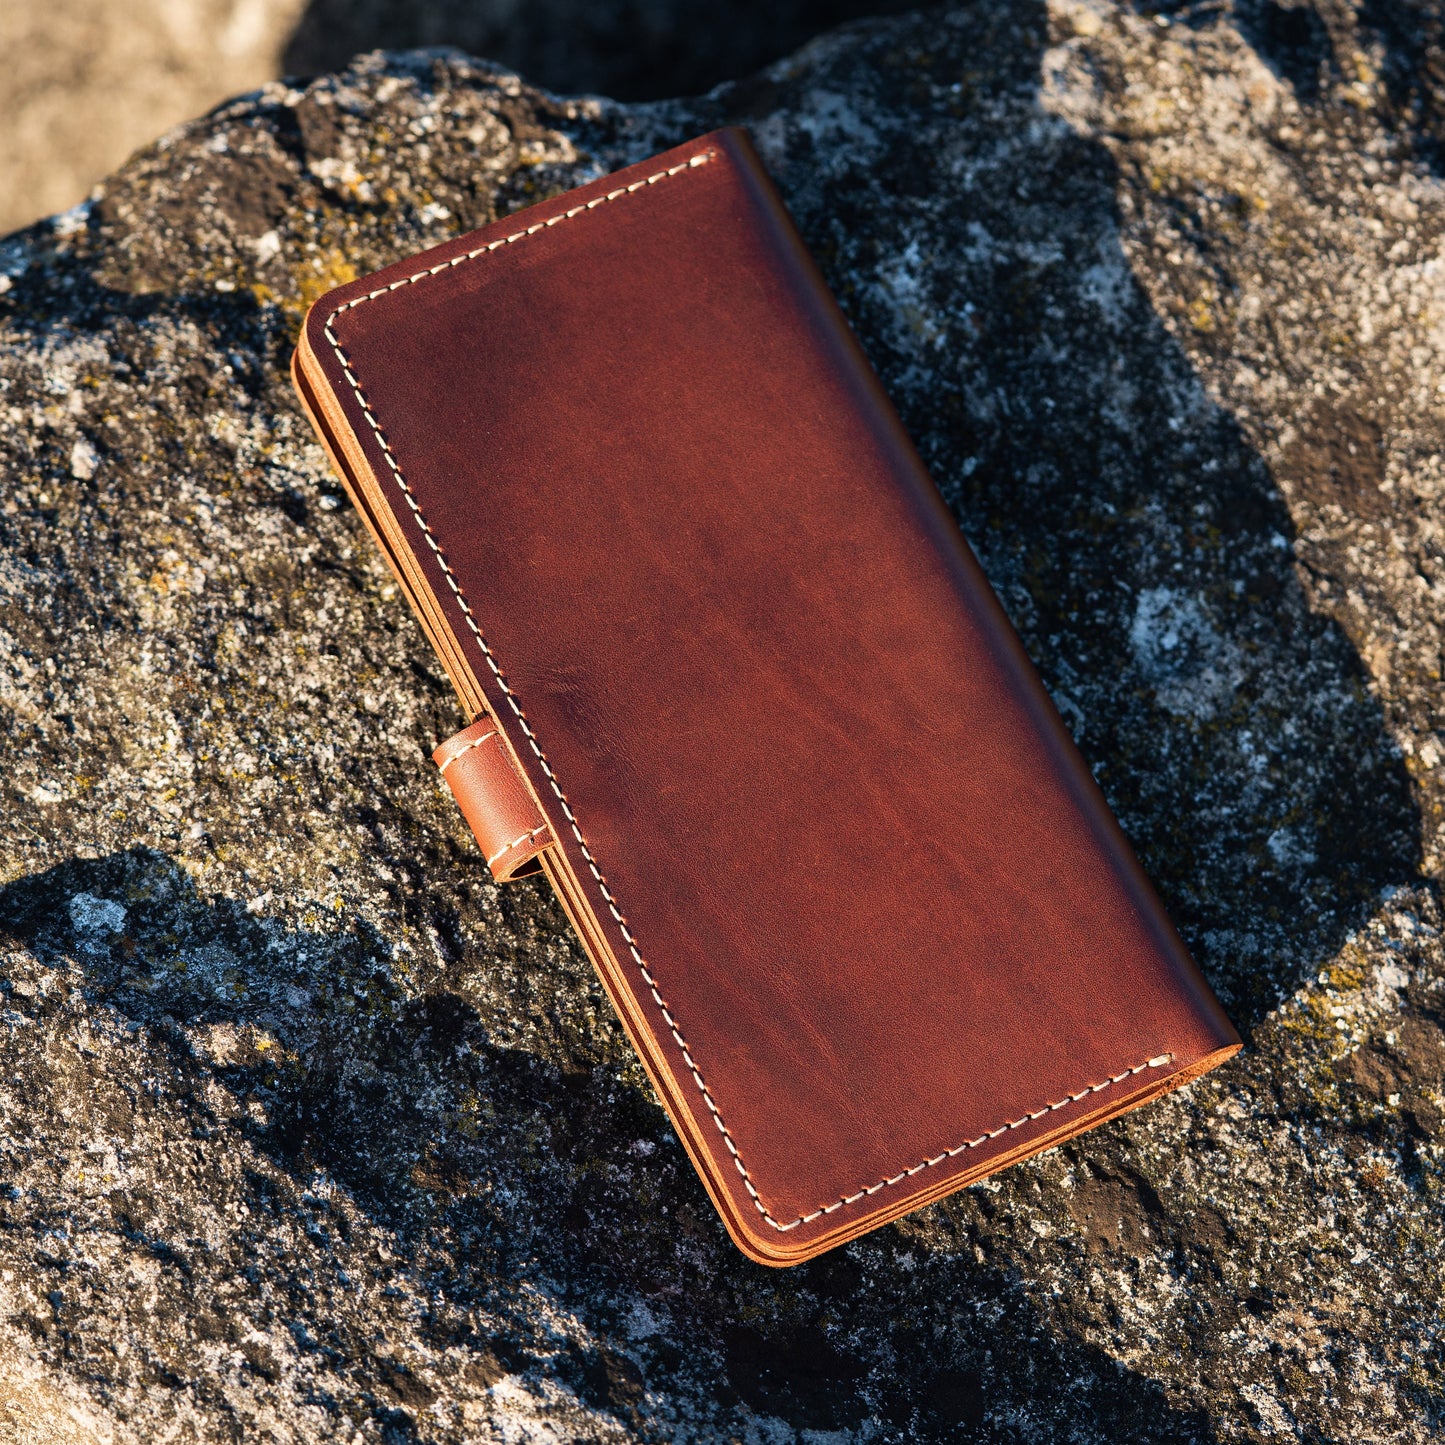 leather wallet | Long Leather Wallet With Card Holder | Coin Pocket | Genuine Leather Wallet | gift ideas